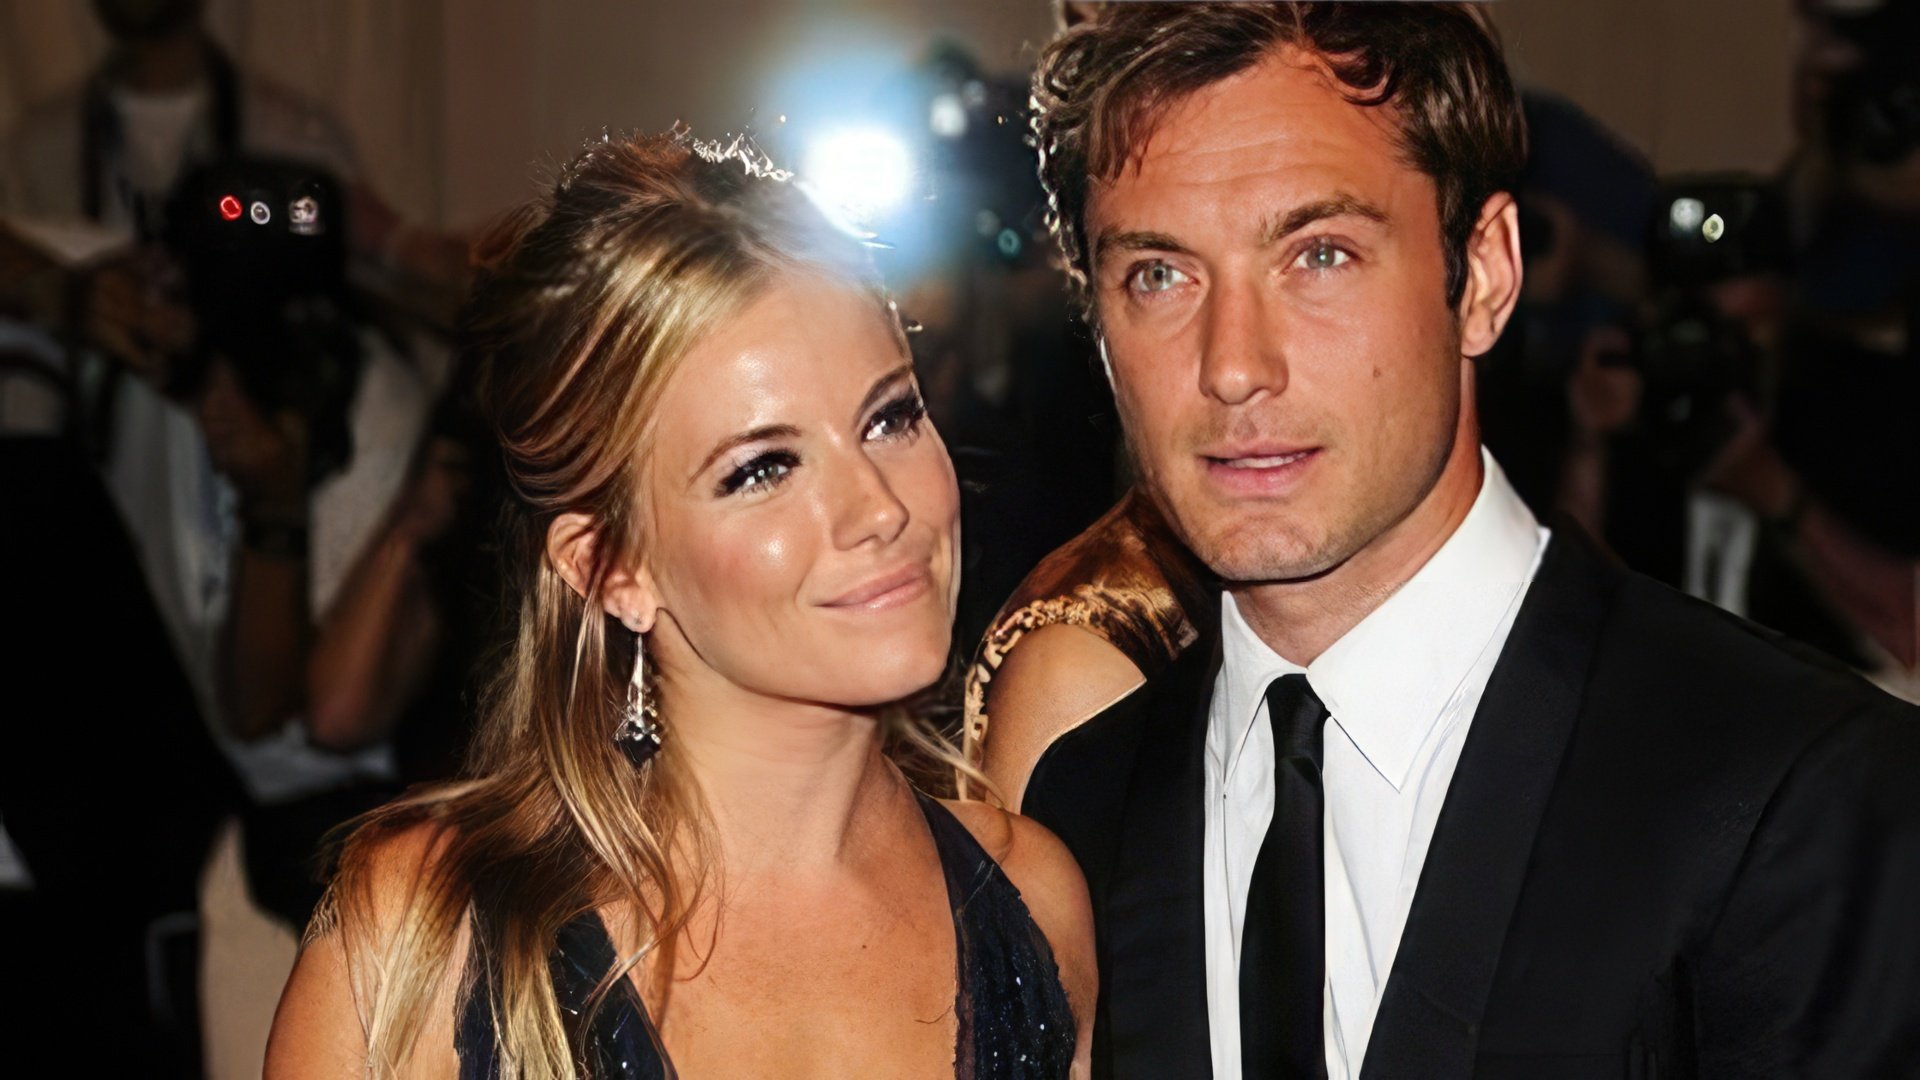 On the photo: Jude Law and Sienna Miller